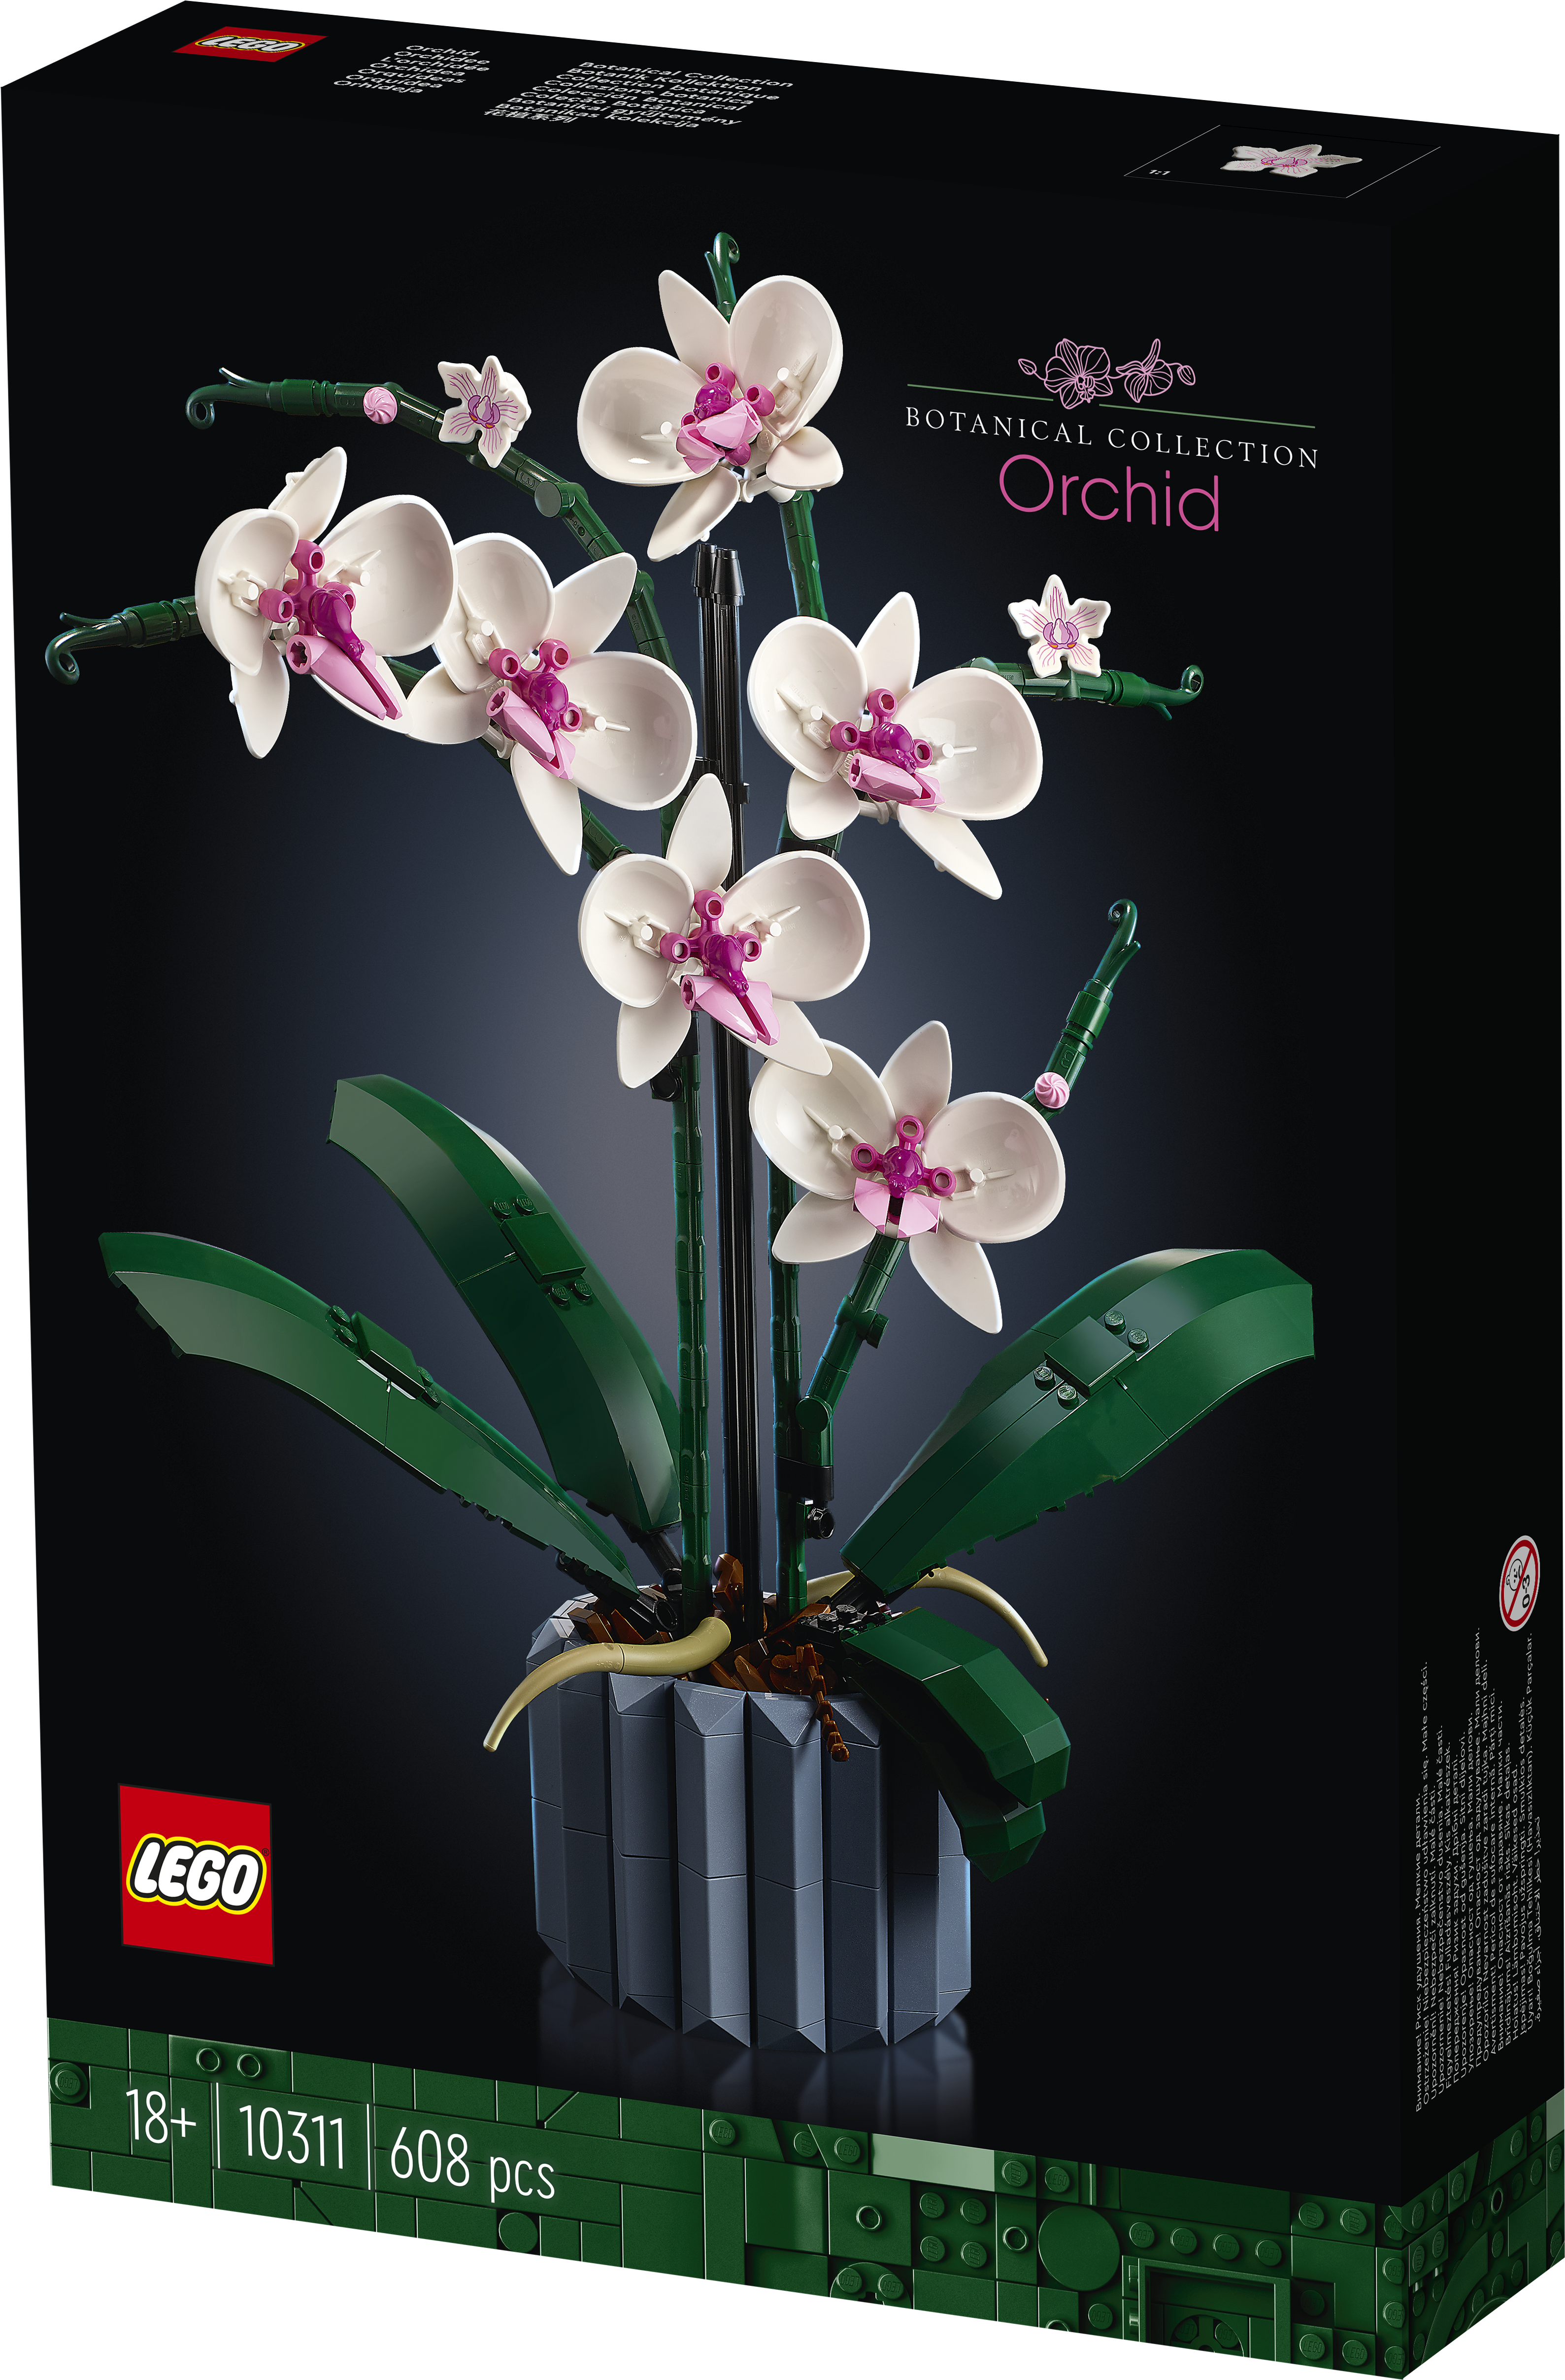 Lego 10311 Orchid Botanical Collection